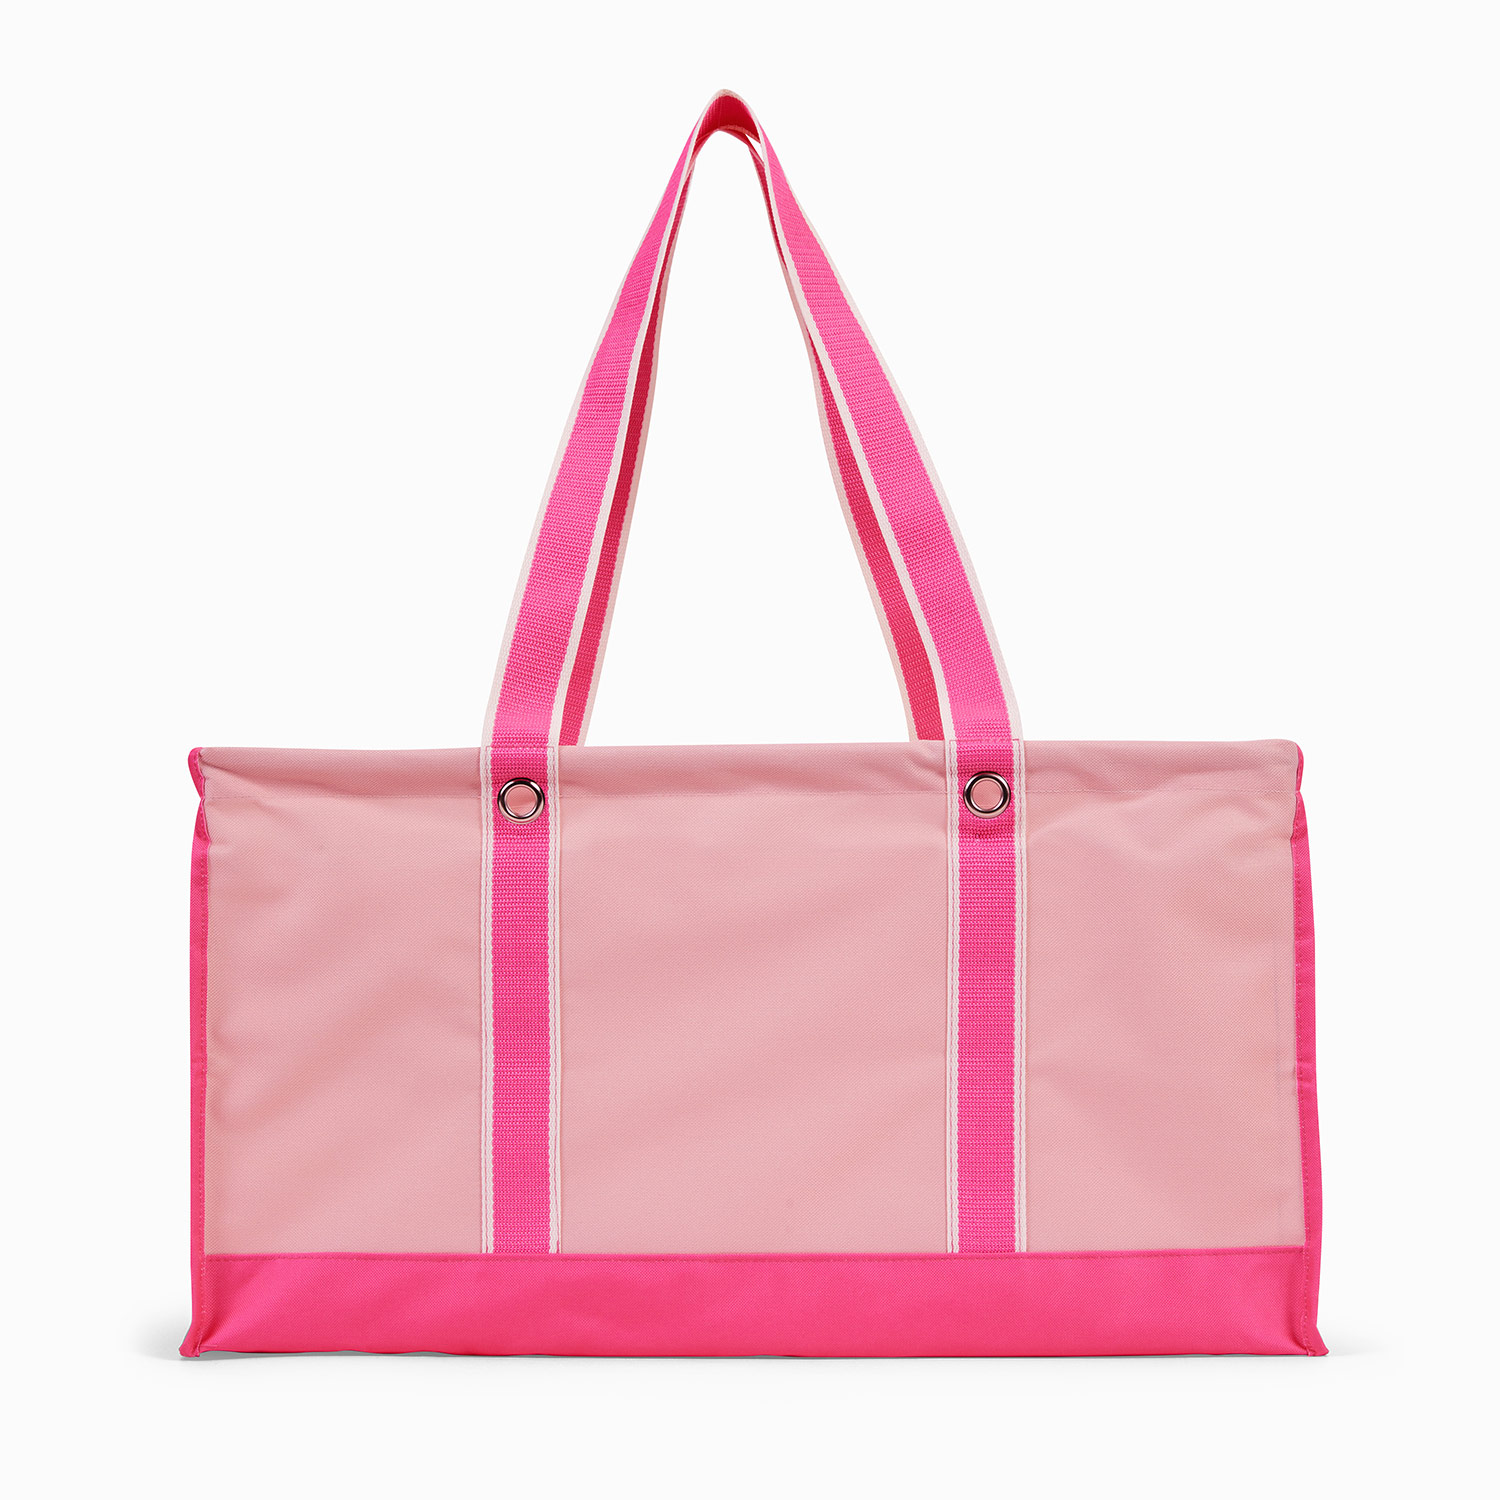  Extra Large Utility Tote Bag With Hard Bottom And Top